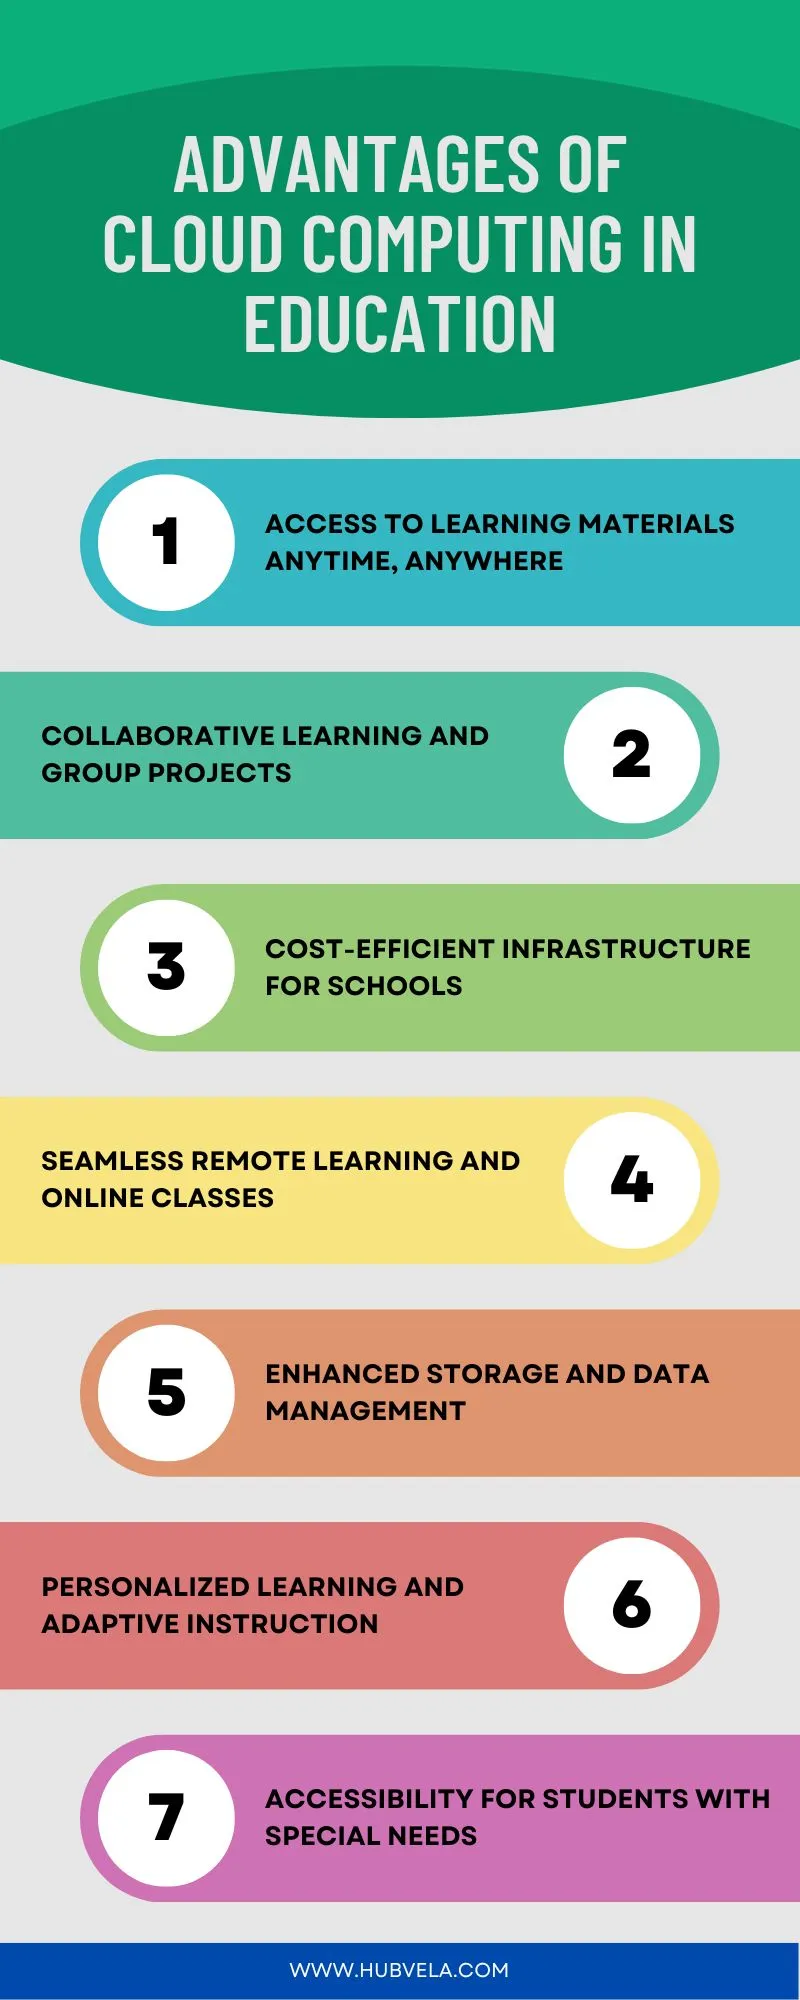 Advantages of Cloud Computing in Education Infographic